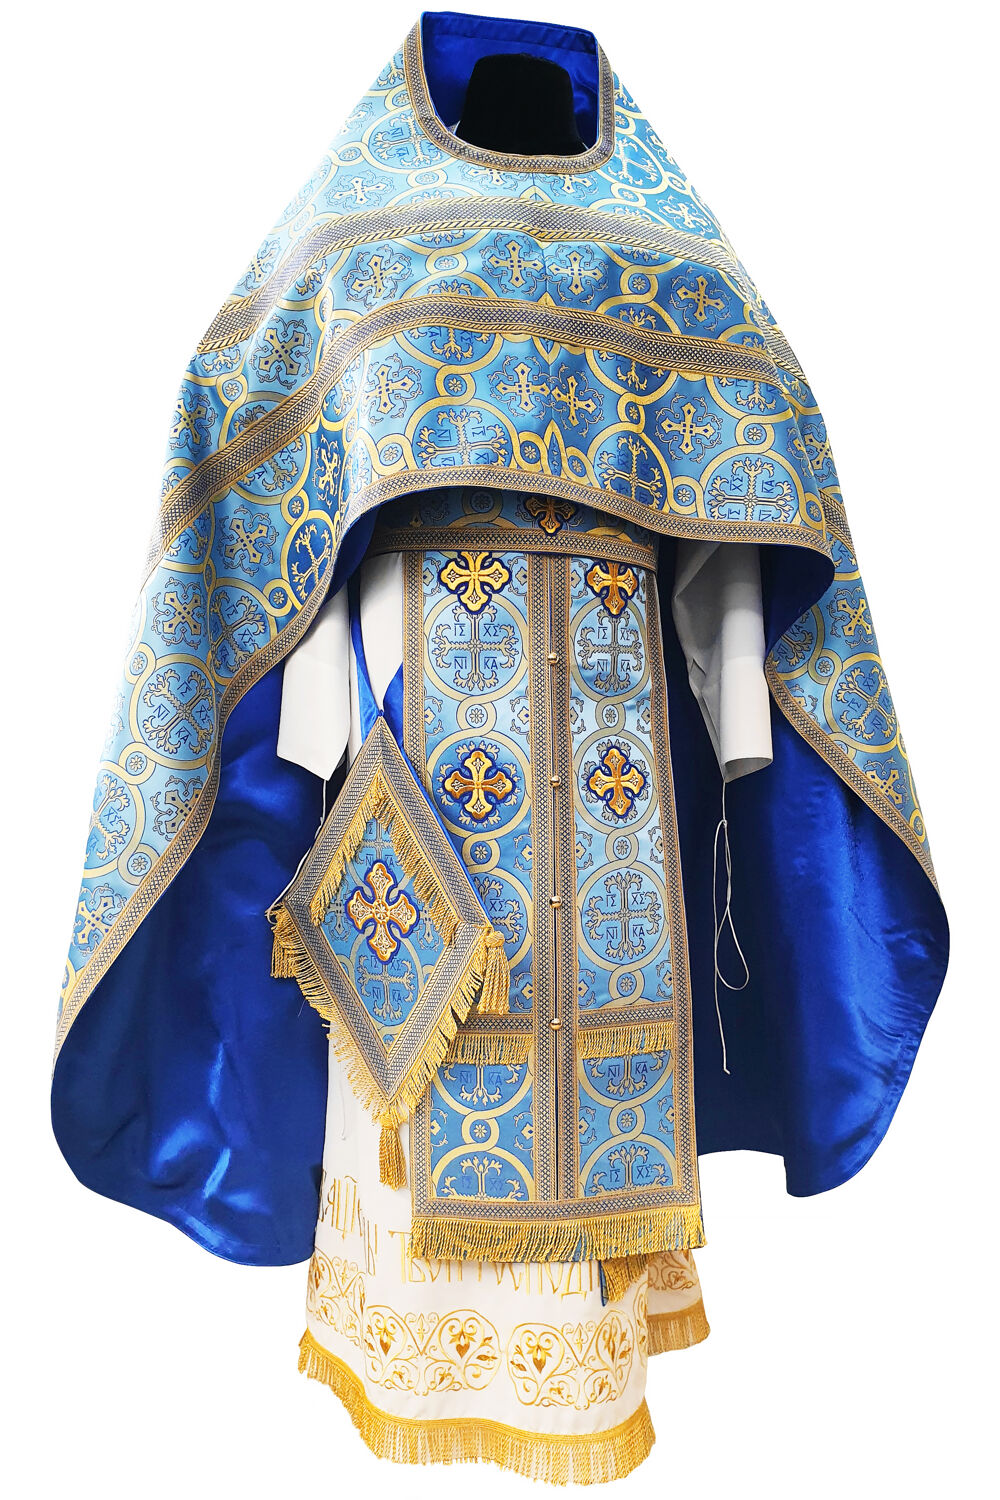 Vestment of Priest sky-blue Russian-style